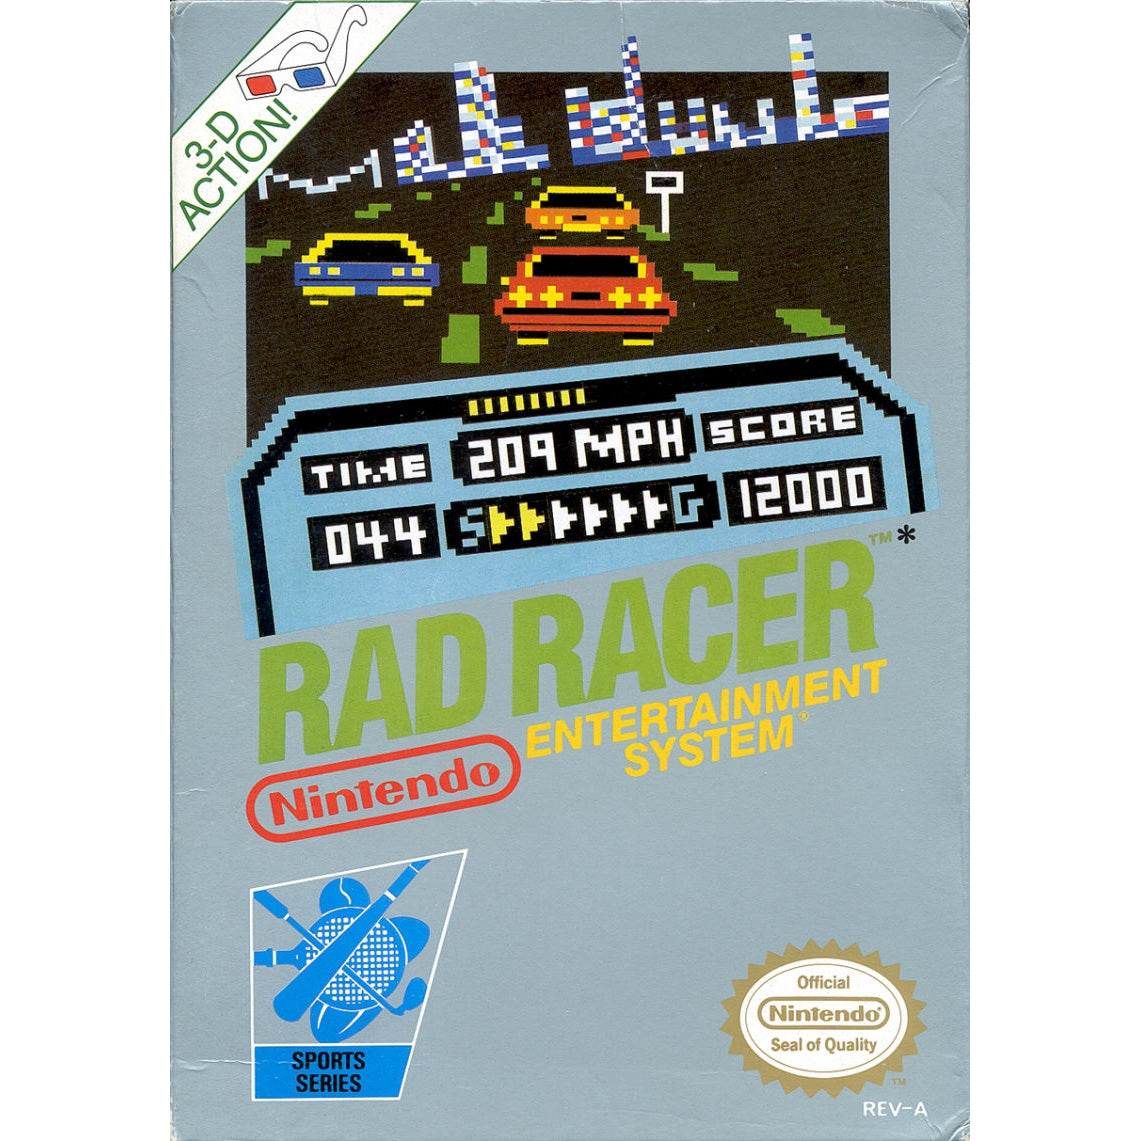 Your Gaming Shop - Rad Racer - Authentic NES Game Cartridge